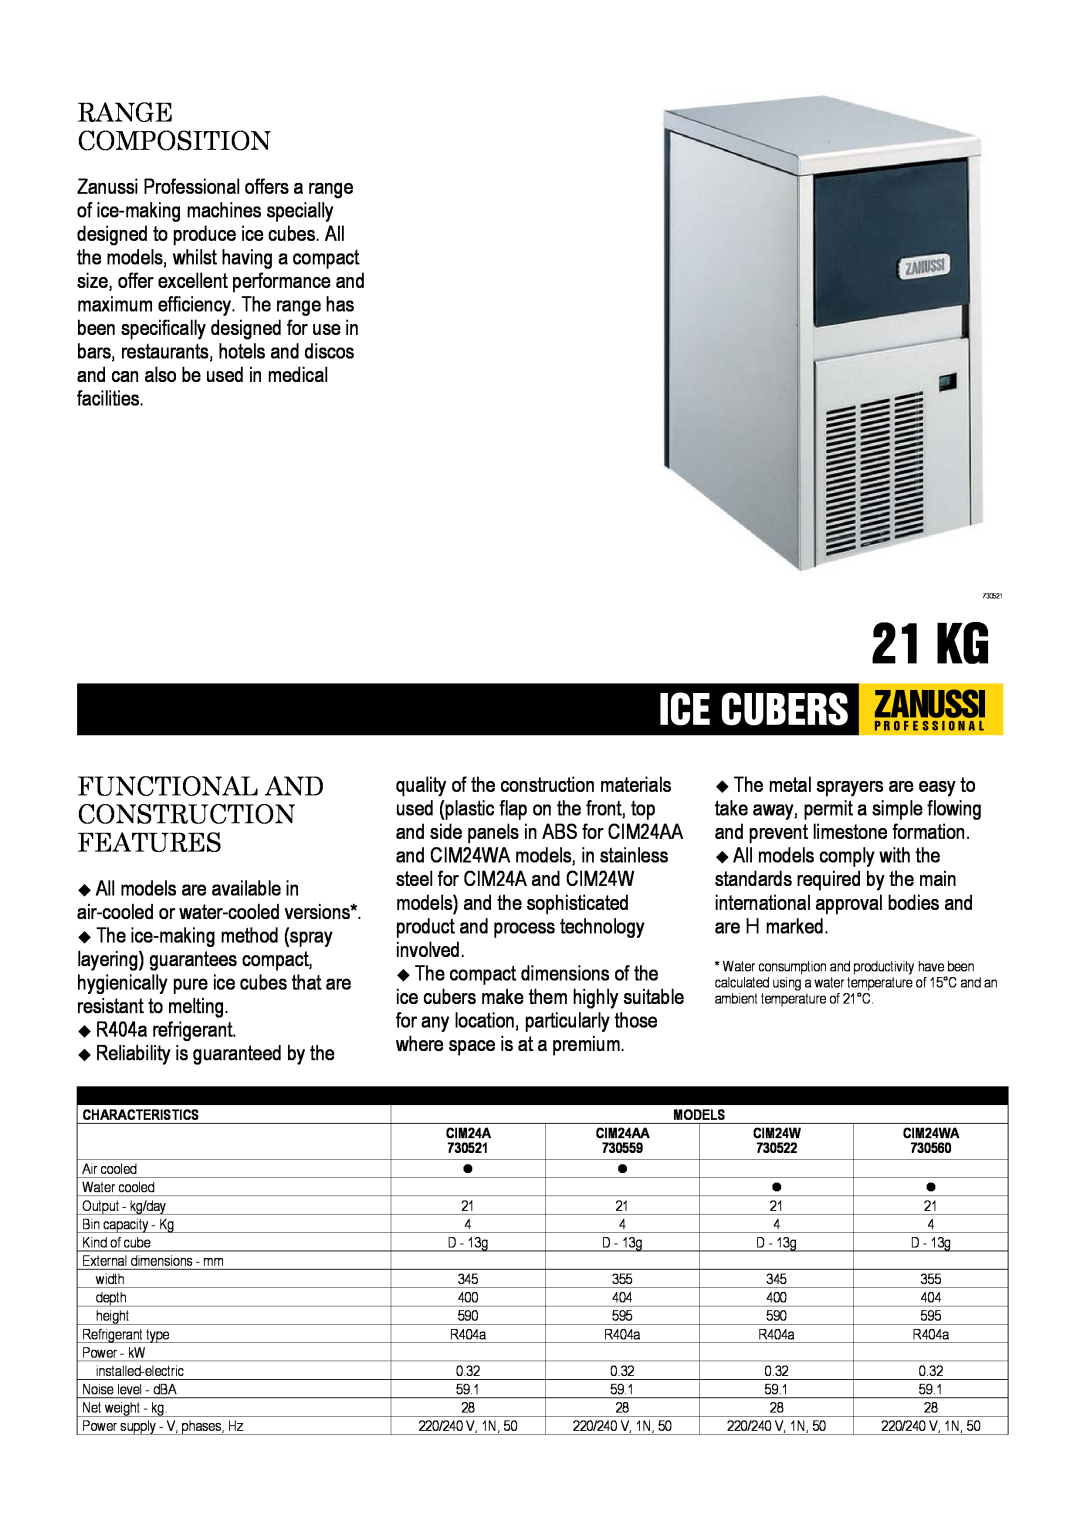 Electrolux CIM24WA, CIM24AA dimensions 21 KG, Range Composition, Functional And Construction Features 